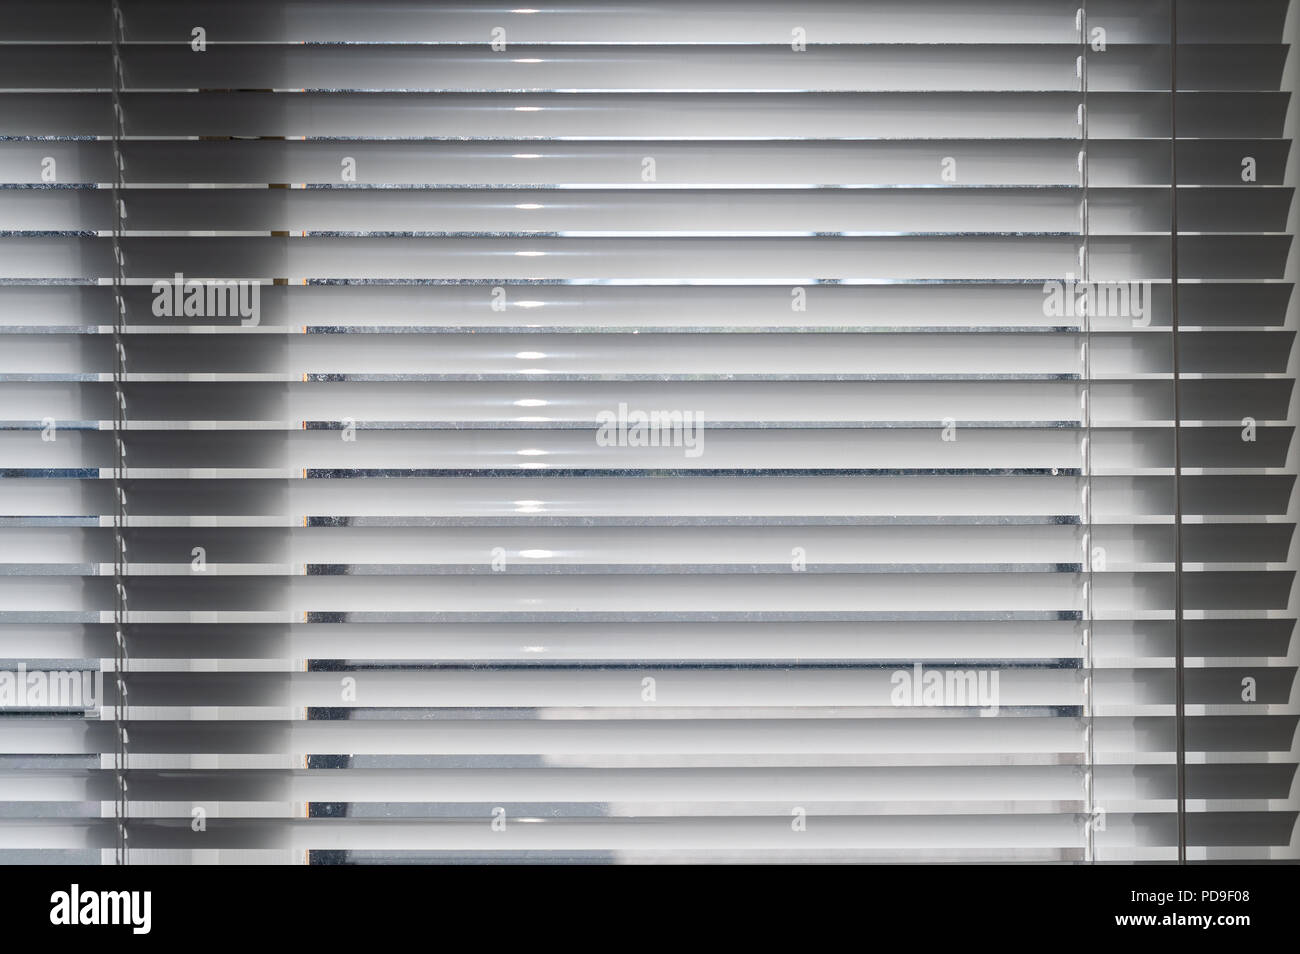 Closed white metal venetian blinds hiding inside world of home from prying views of outside, afraid of going outside. Stock Photo